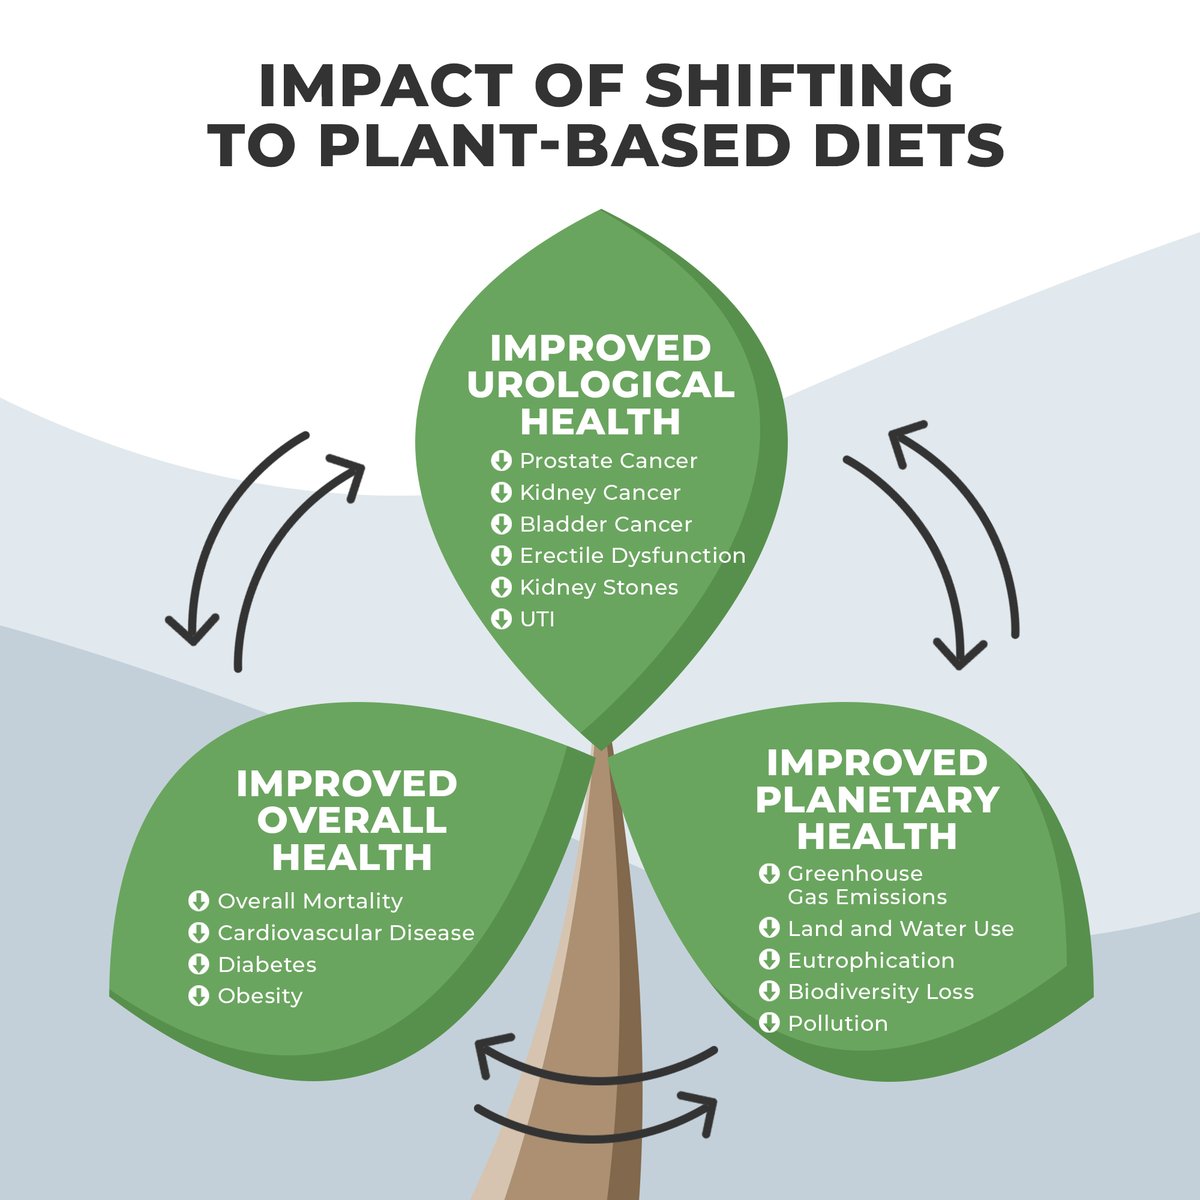 Thanks to @EUplatinum @JimCatto @Albert0Briganti for publishing this perspective. Our food choices directly impact our well-being and the environment. Let's build momentum in urology to promote a greener future and better health outcomes! 🌱🌍 #PlanetaryHealth